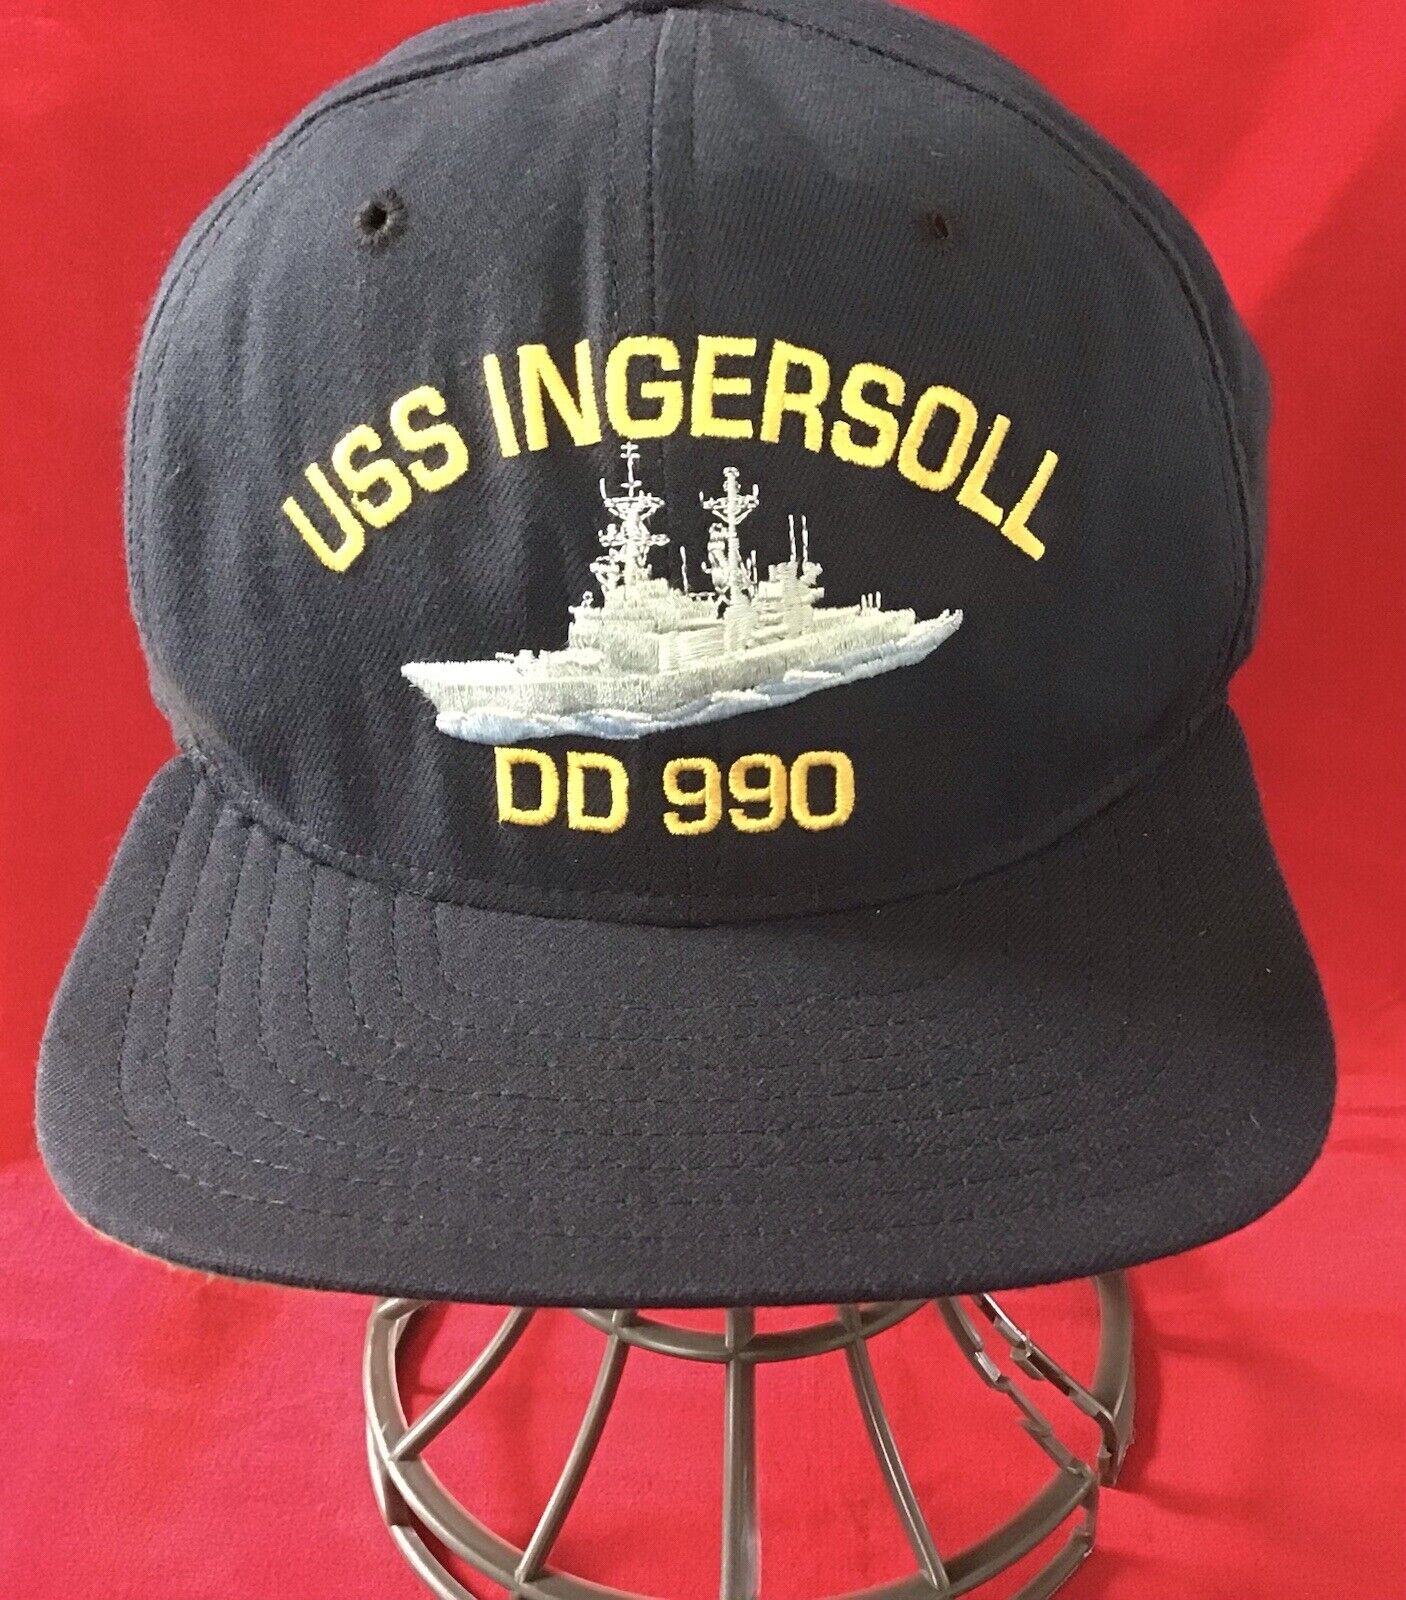 Collectable Hat USS Ingersoll DD 990 Vintage New Era Made In USA